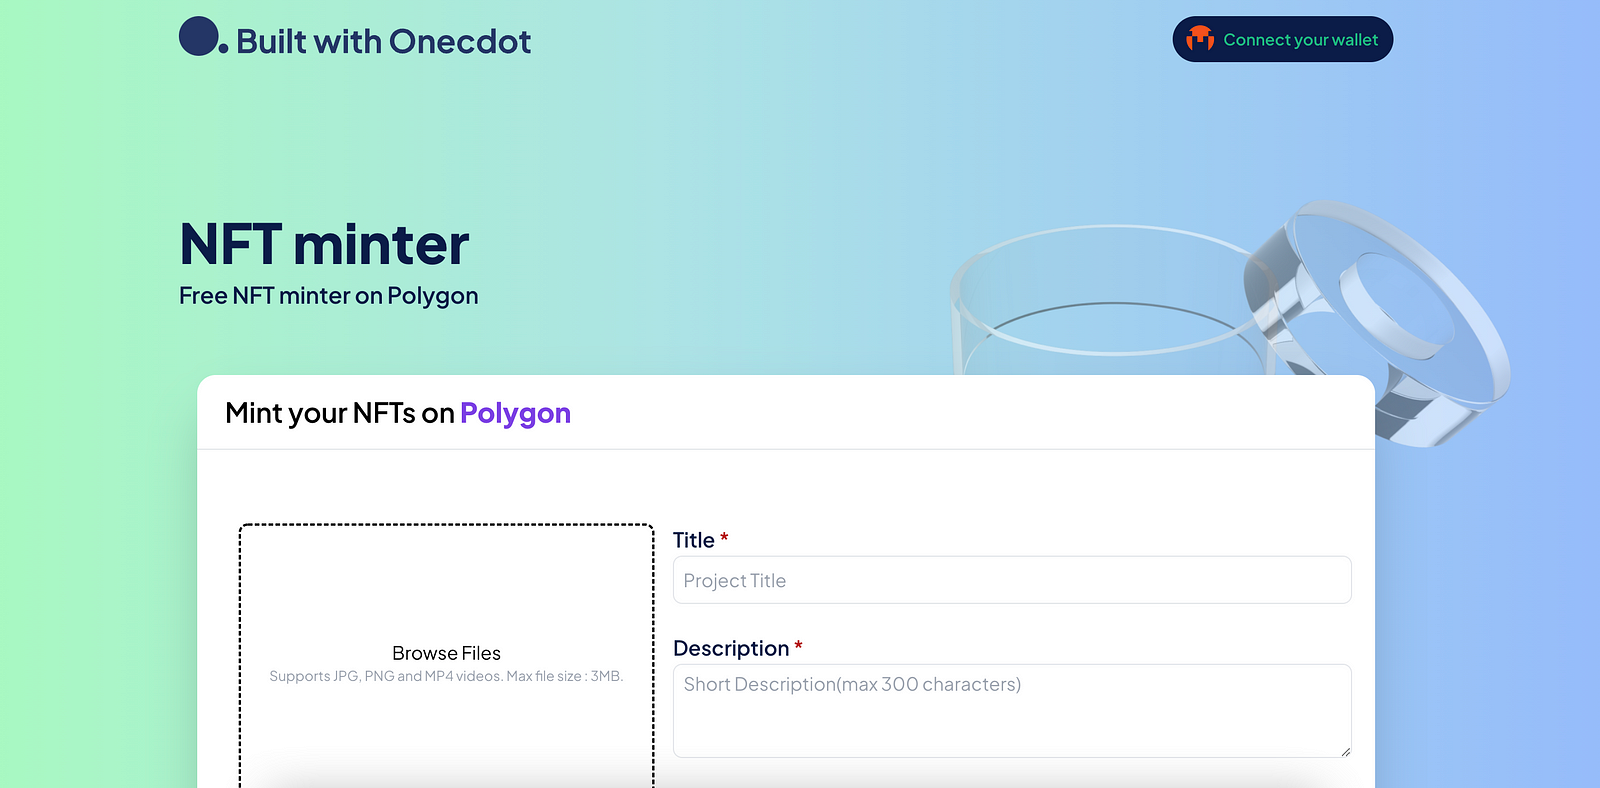 Preview NFT Minter on Polygon by Onecdot